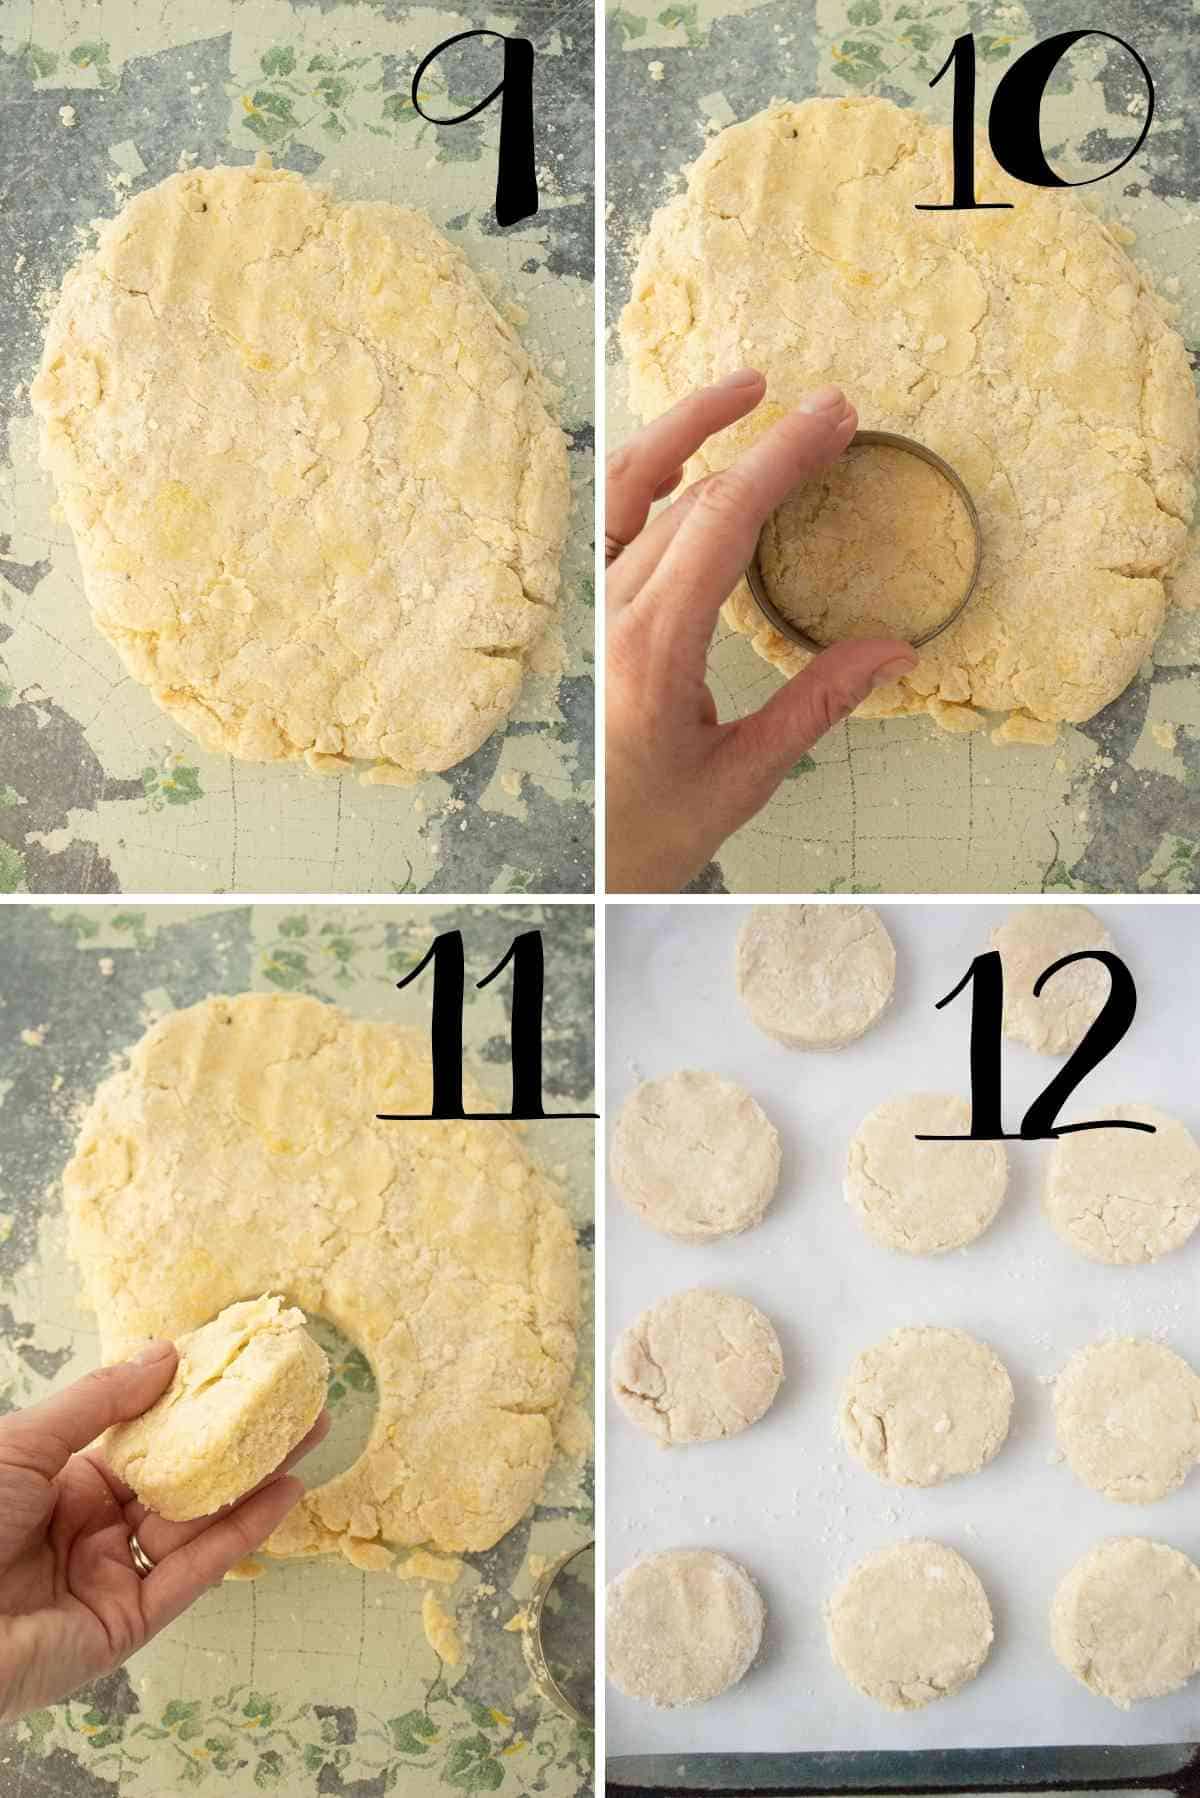 Dough patted out, cut into circles and put on a baking sheet.